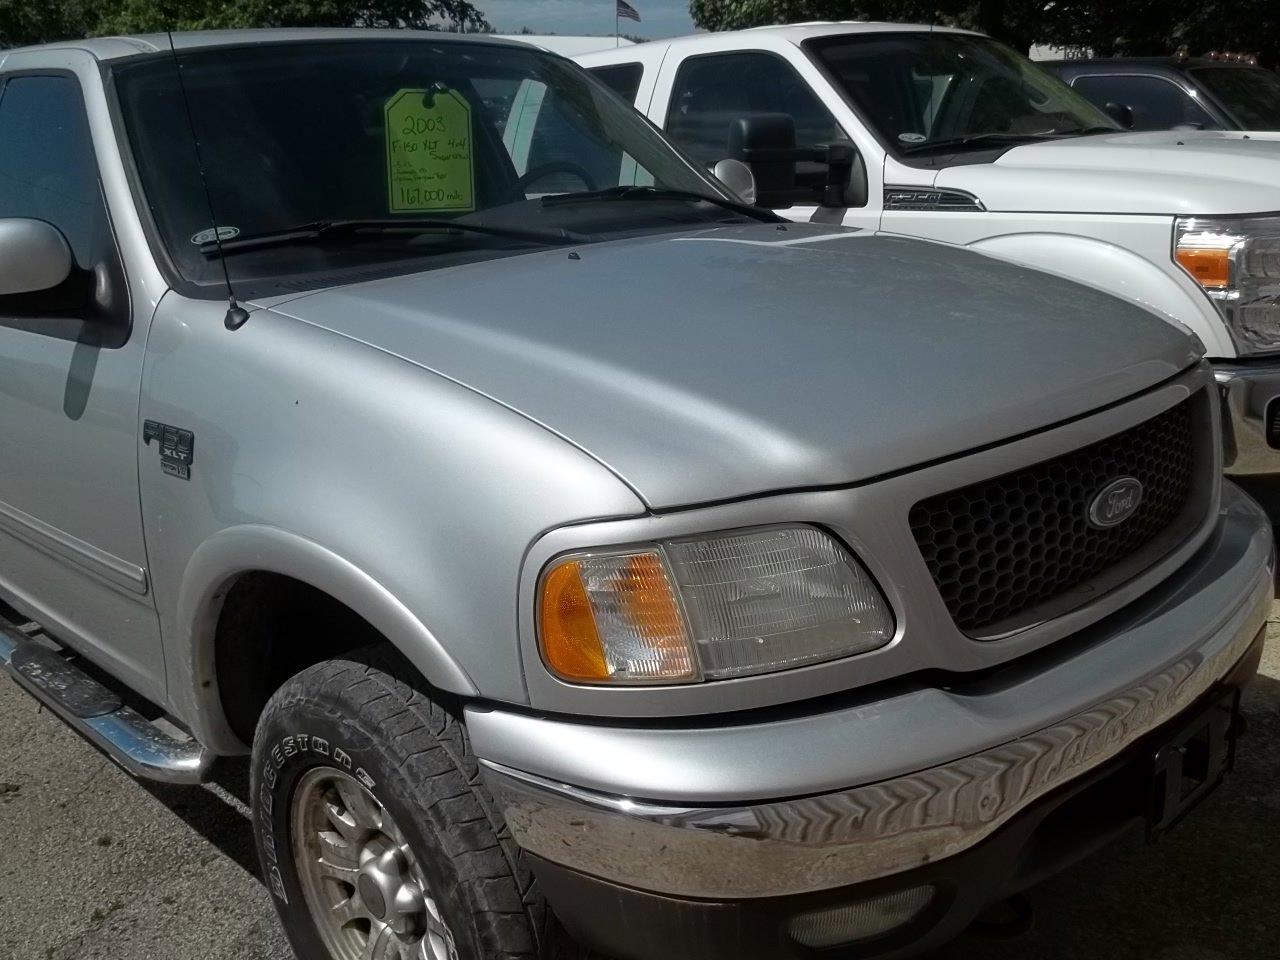 Used 2003 Ford F-150 XLT with VIN 1FTRW08L43KB25628 for sale in Delavan, IL